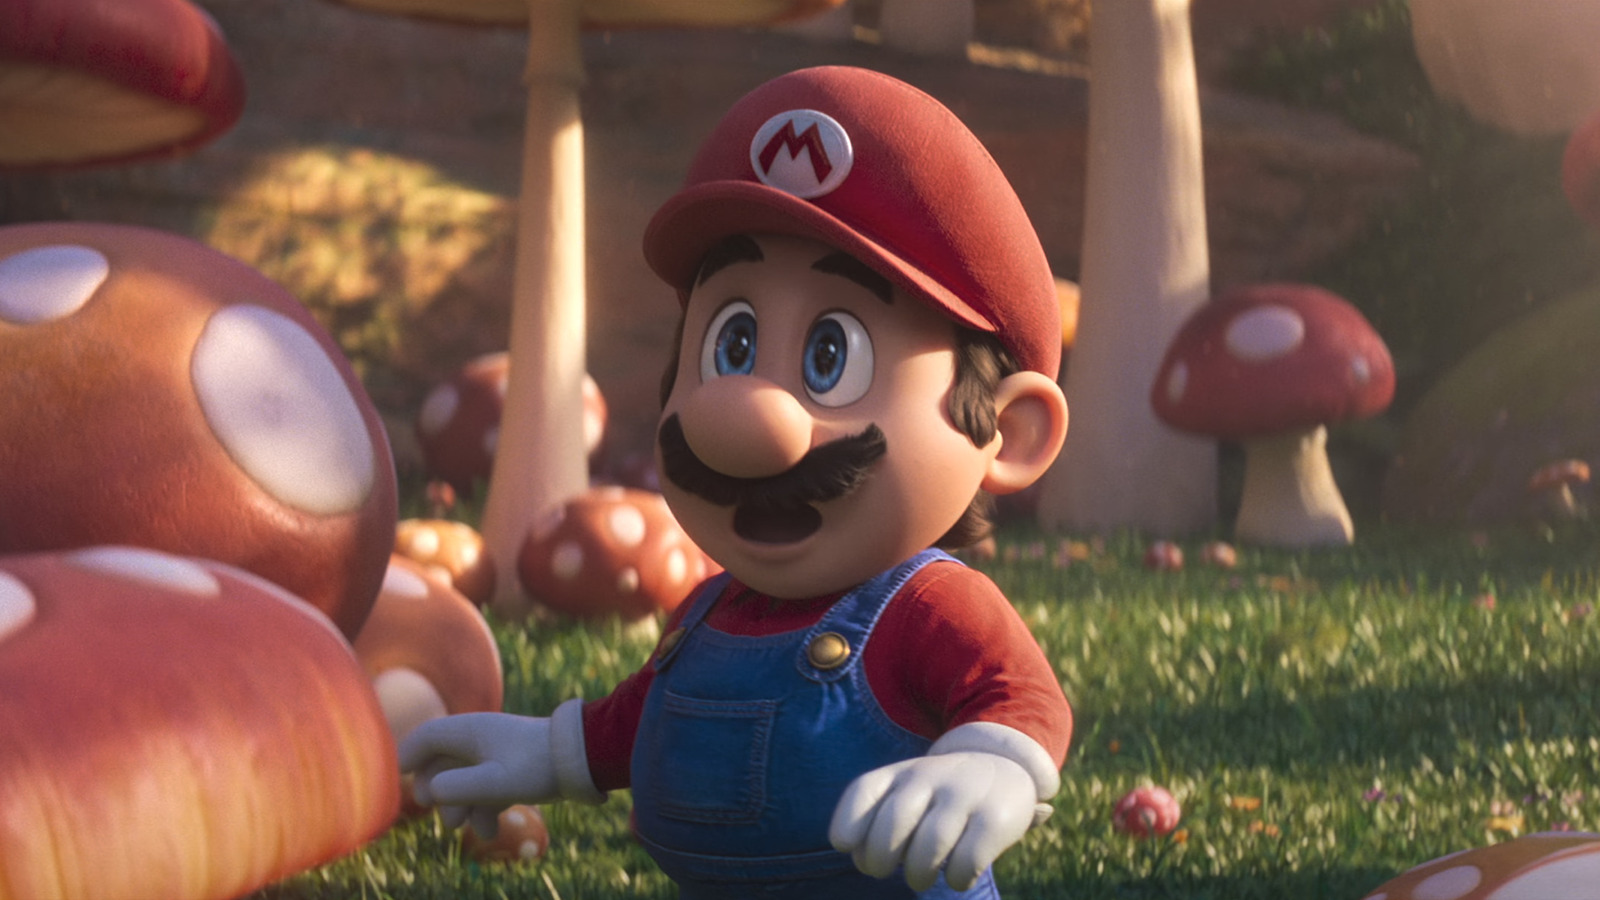 When the Mario movie will come to Netflix and other streaming